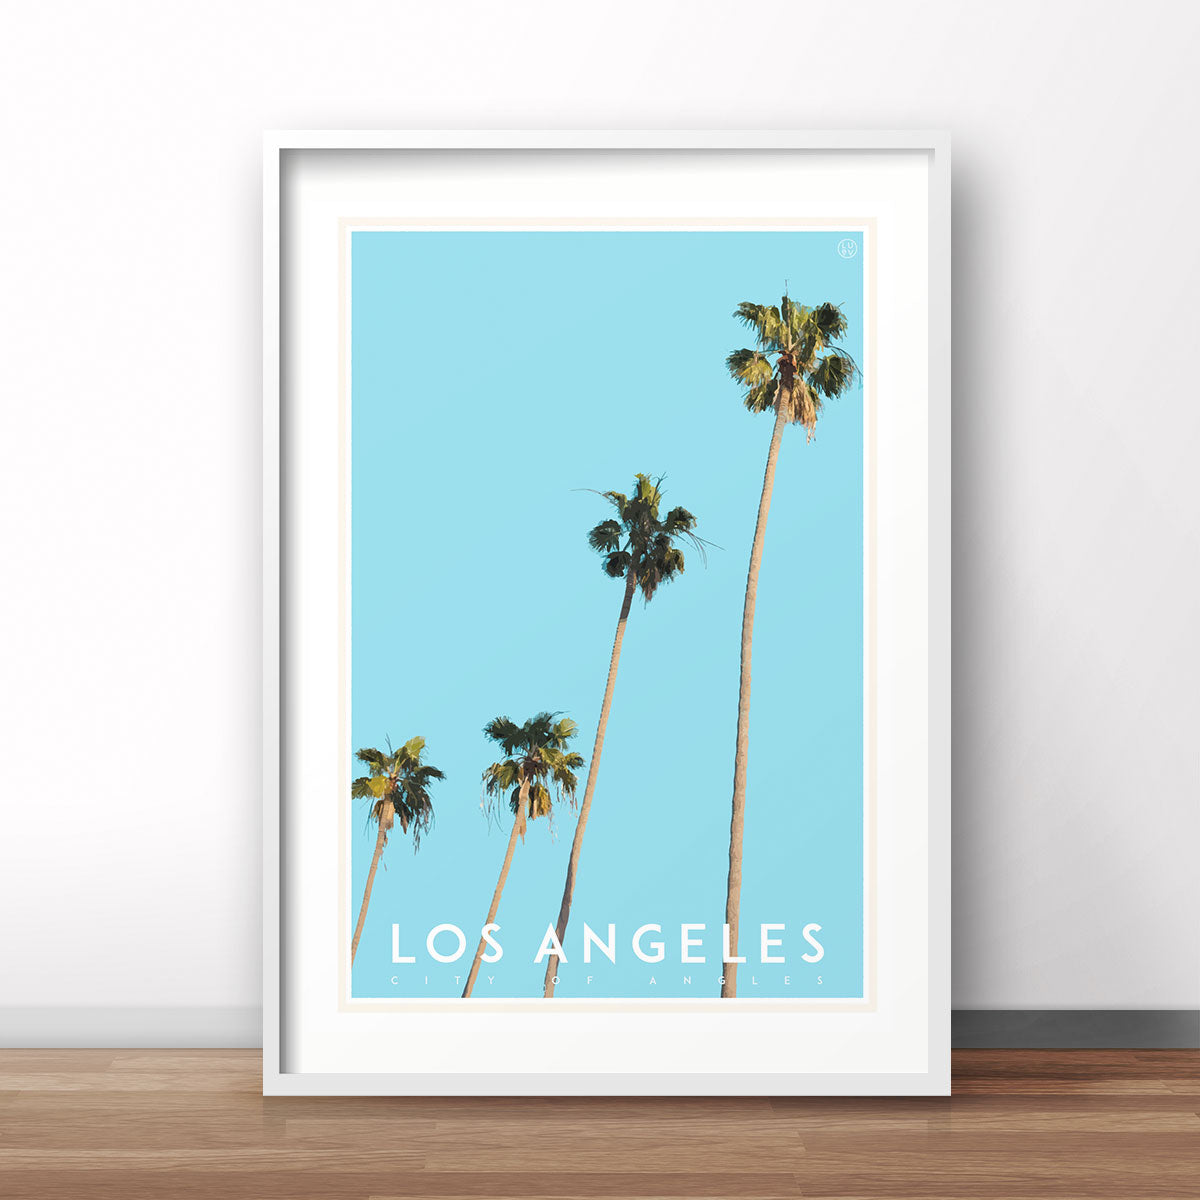 Los Angeles vintage travel style poster by Placesweluv